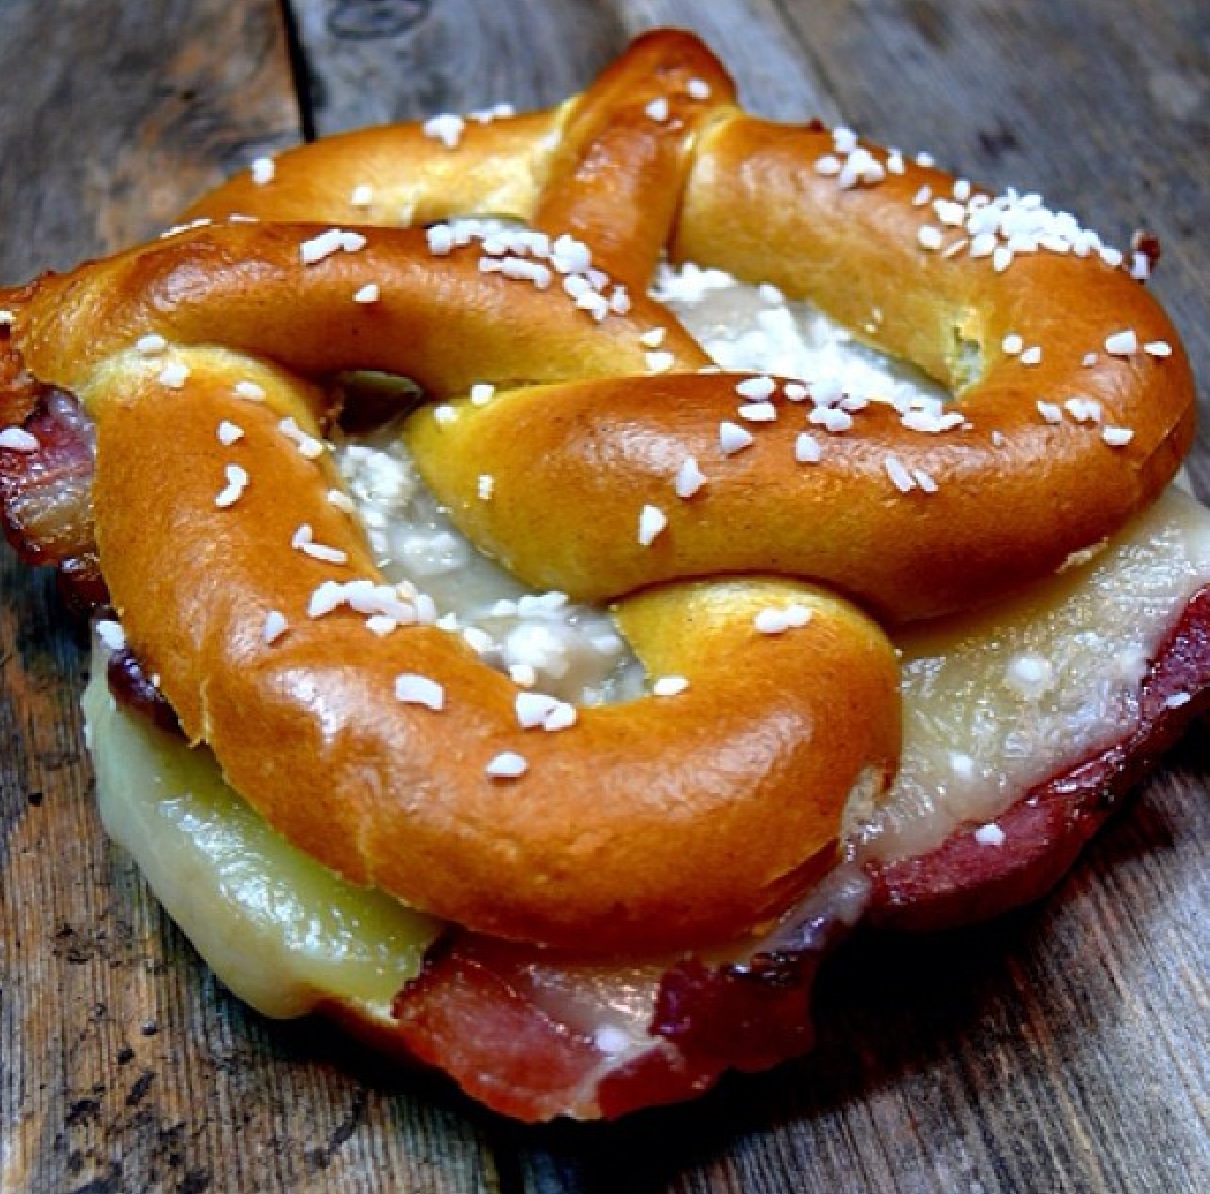 Grilled Cheese With Bacon On A Pretzel by @chefneeds